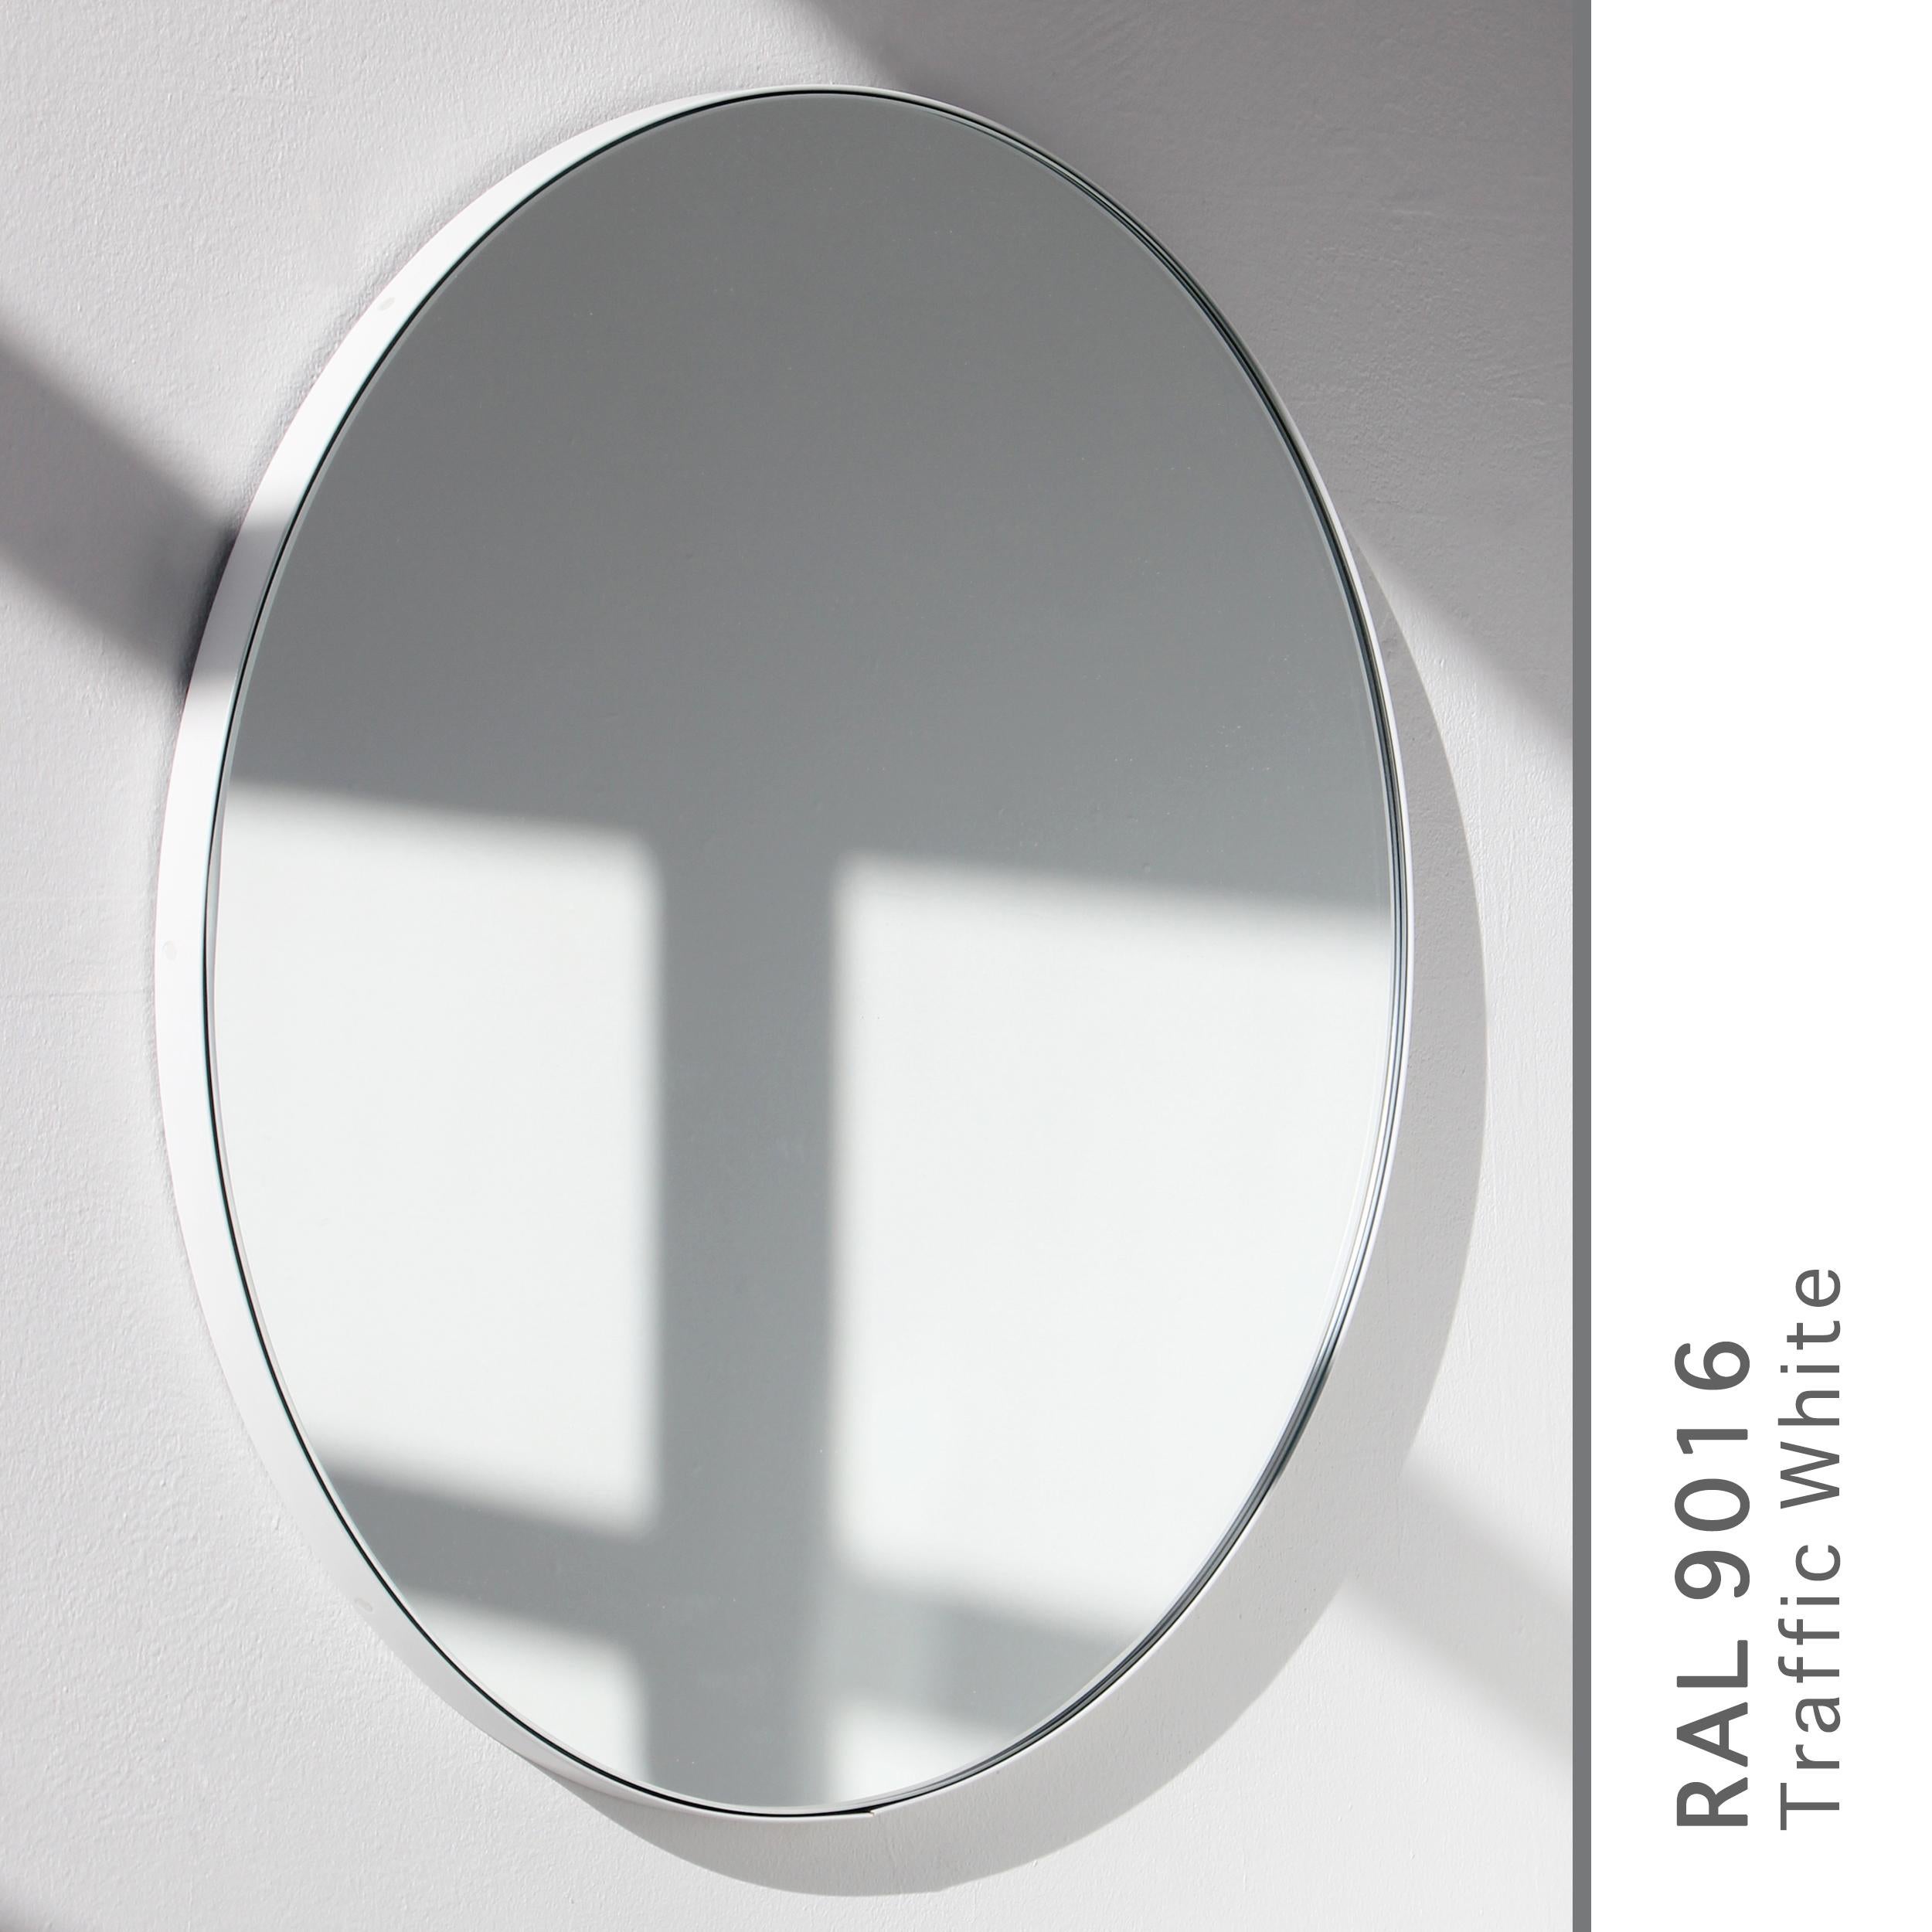 Powder-Coated Orbis Round Minimalist Mirror with White Frame, Large For Sale